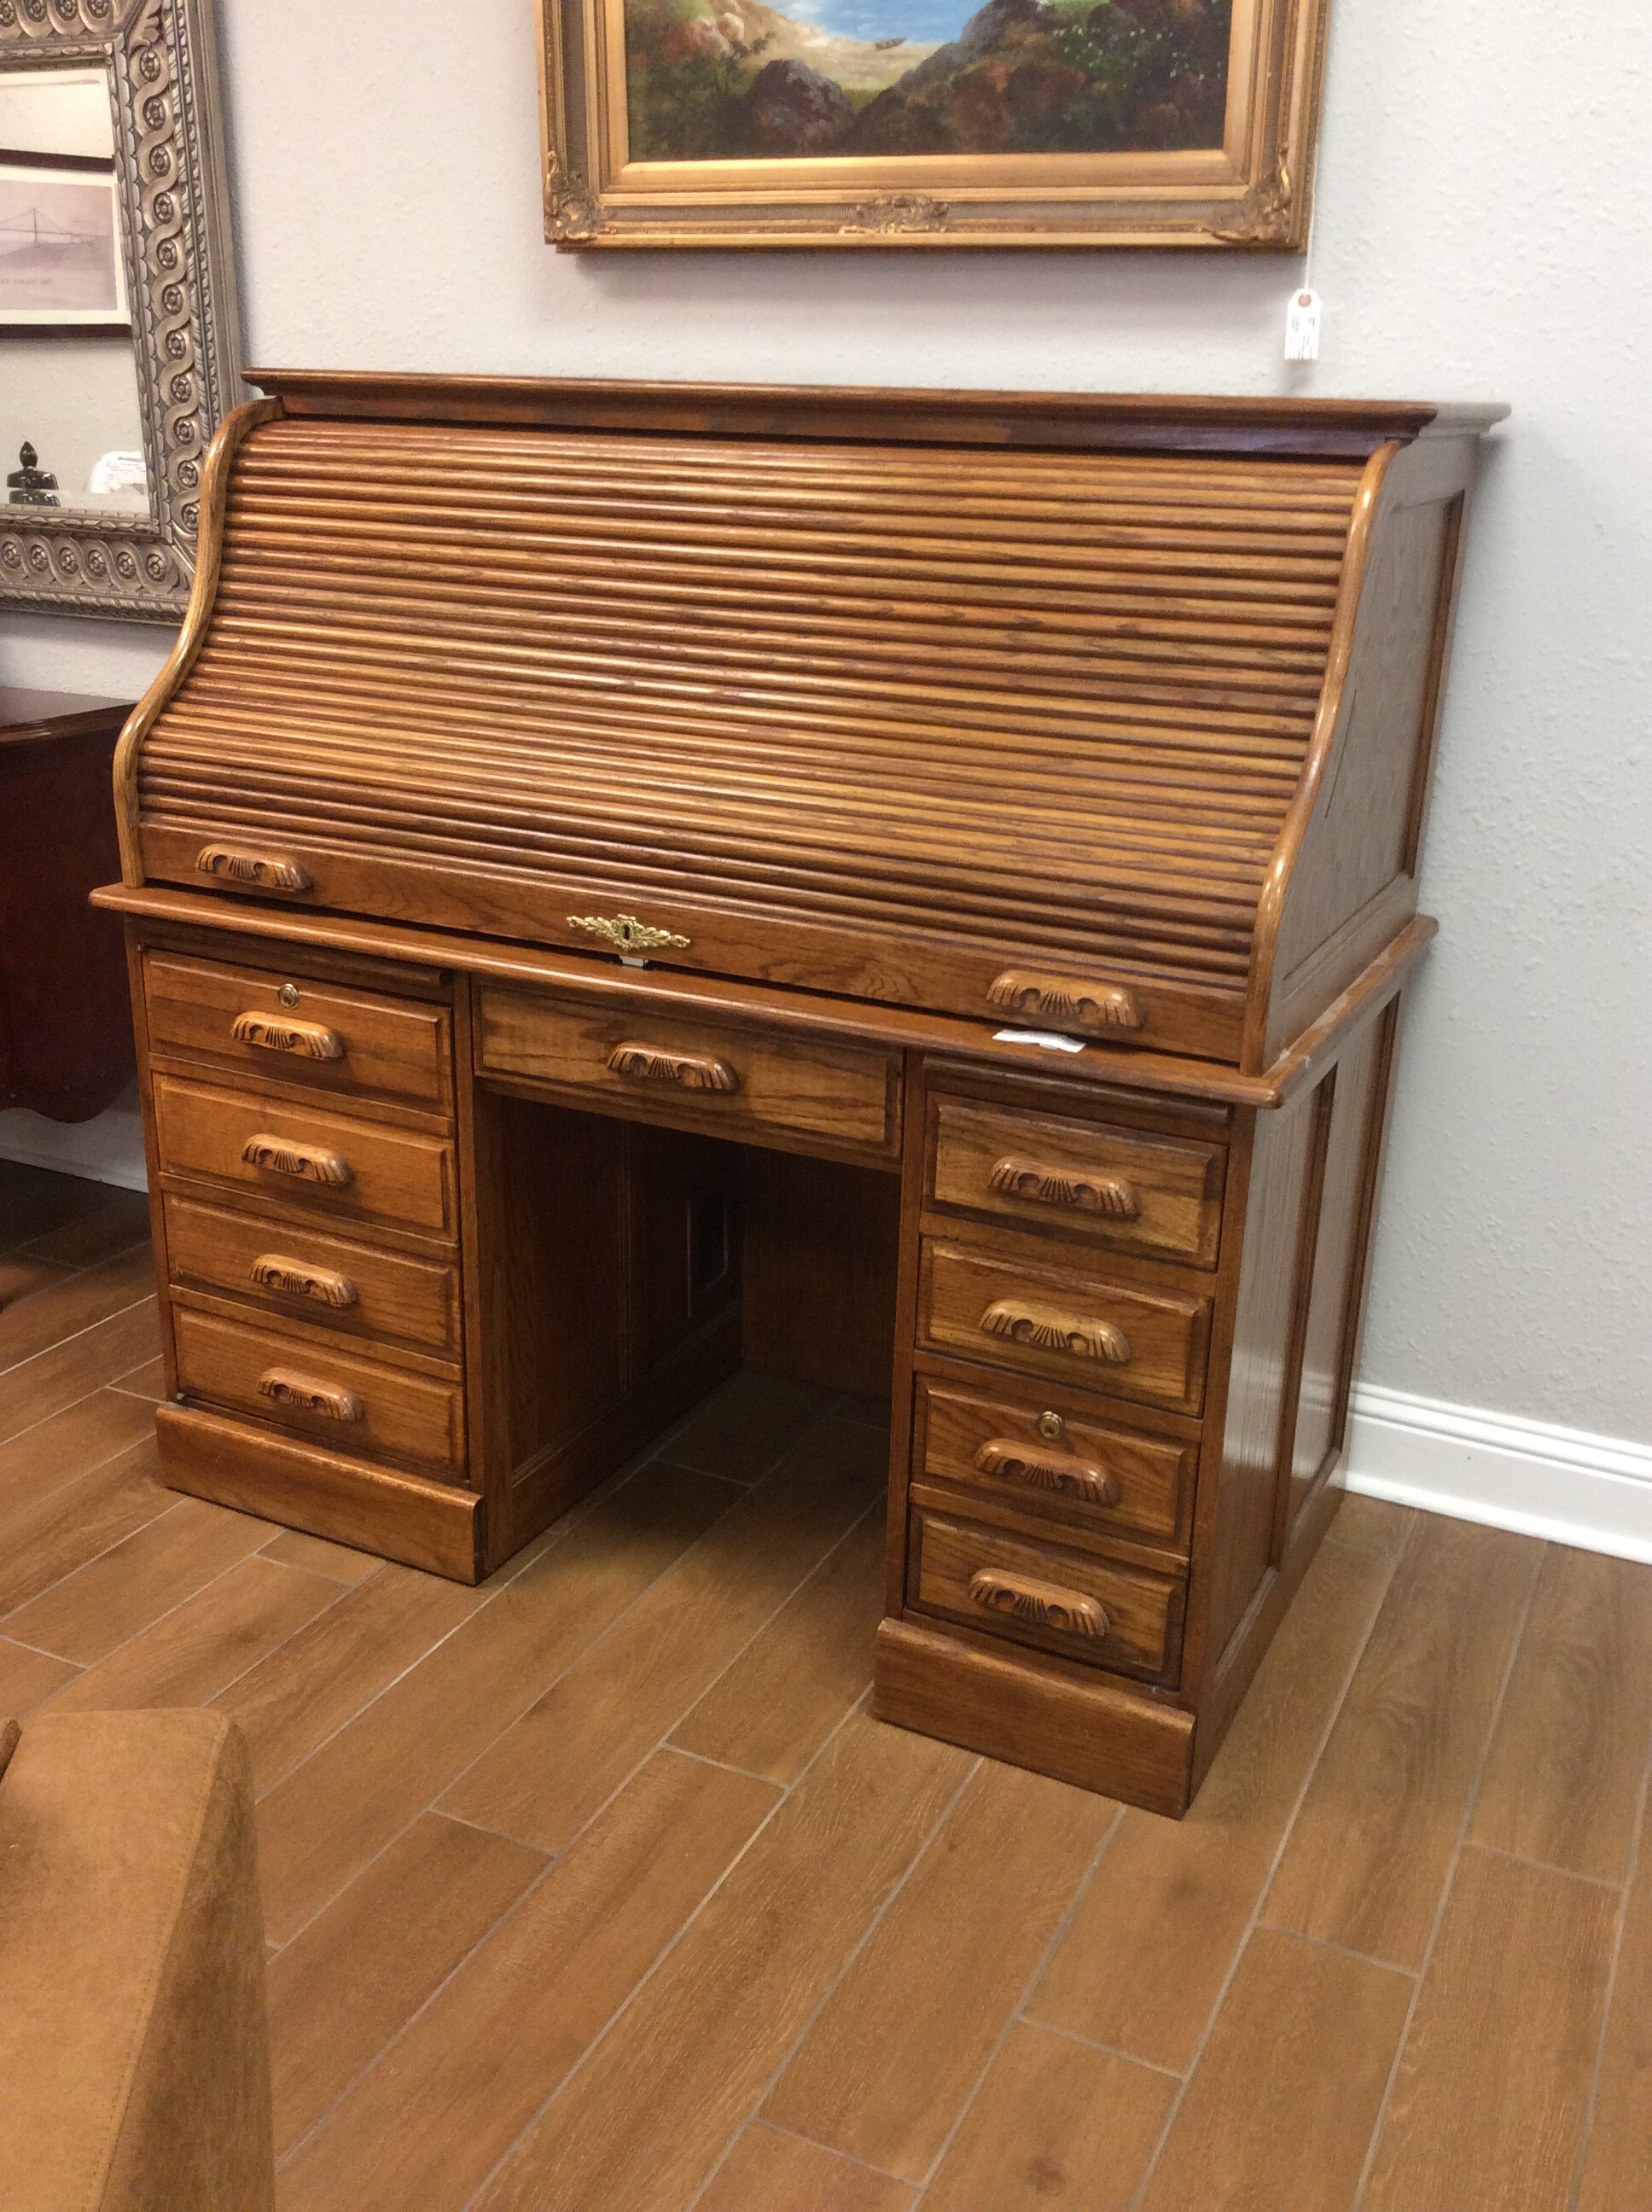 These don't last long here, so come by and take a look!
This one is in good condition and includes all of the standard features plus some. There are cubbies, file holders, a pull-out tray, drawers and more. Key included.